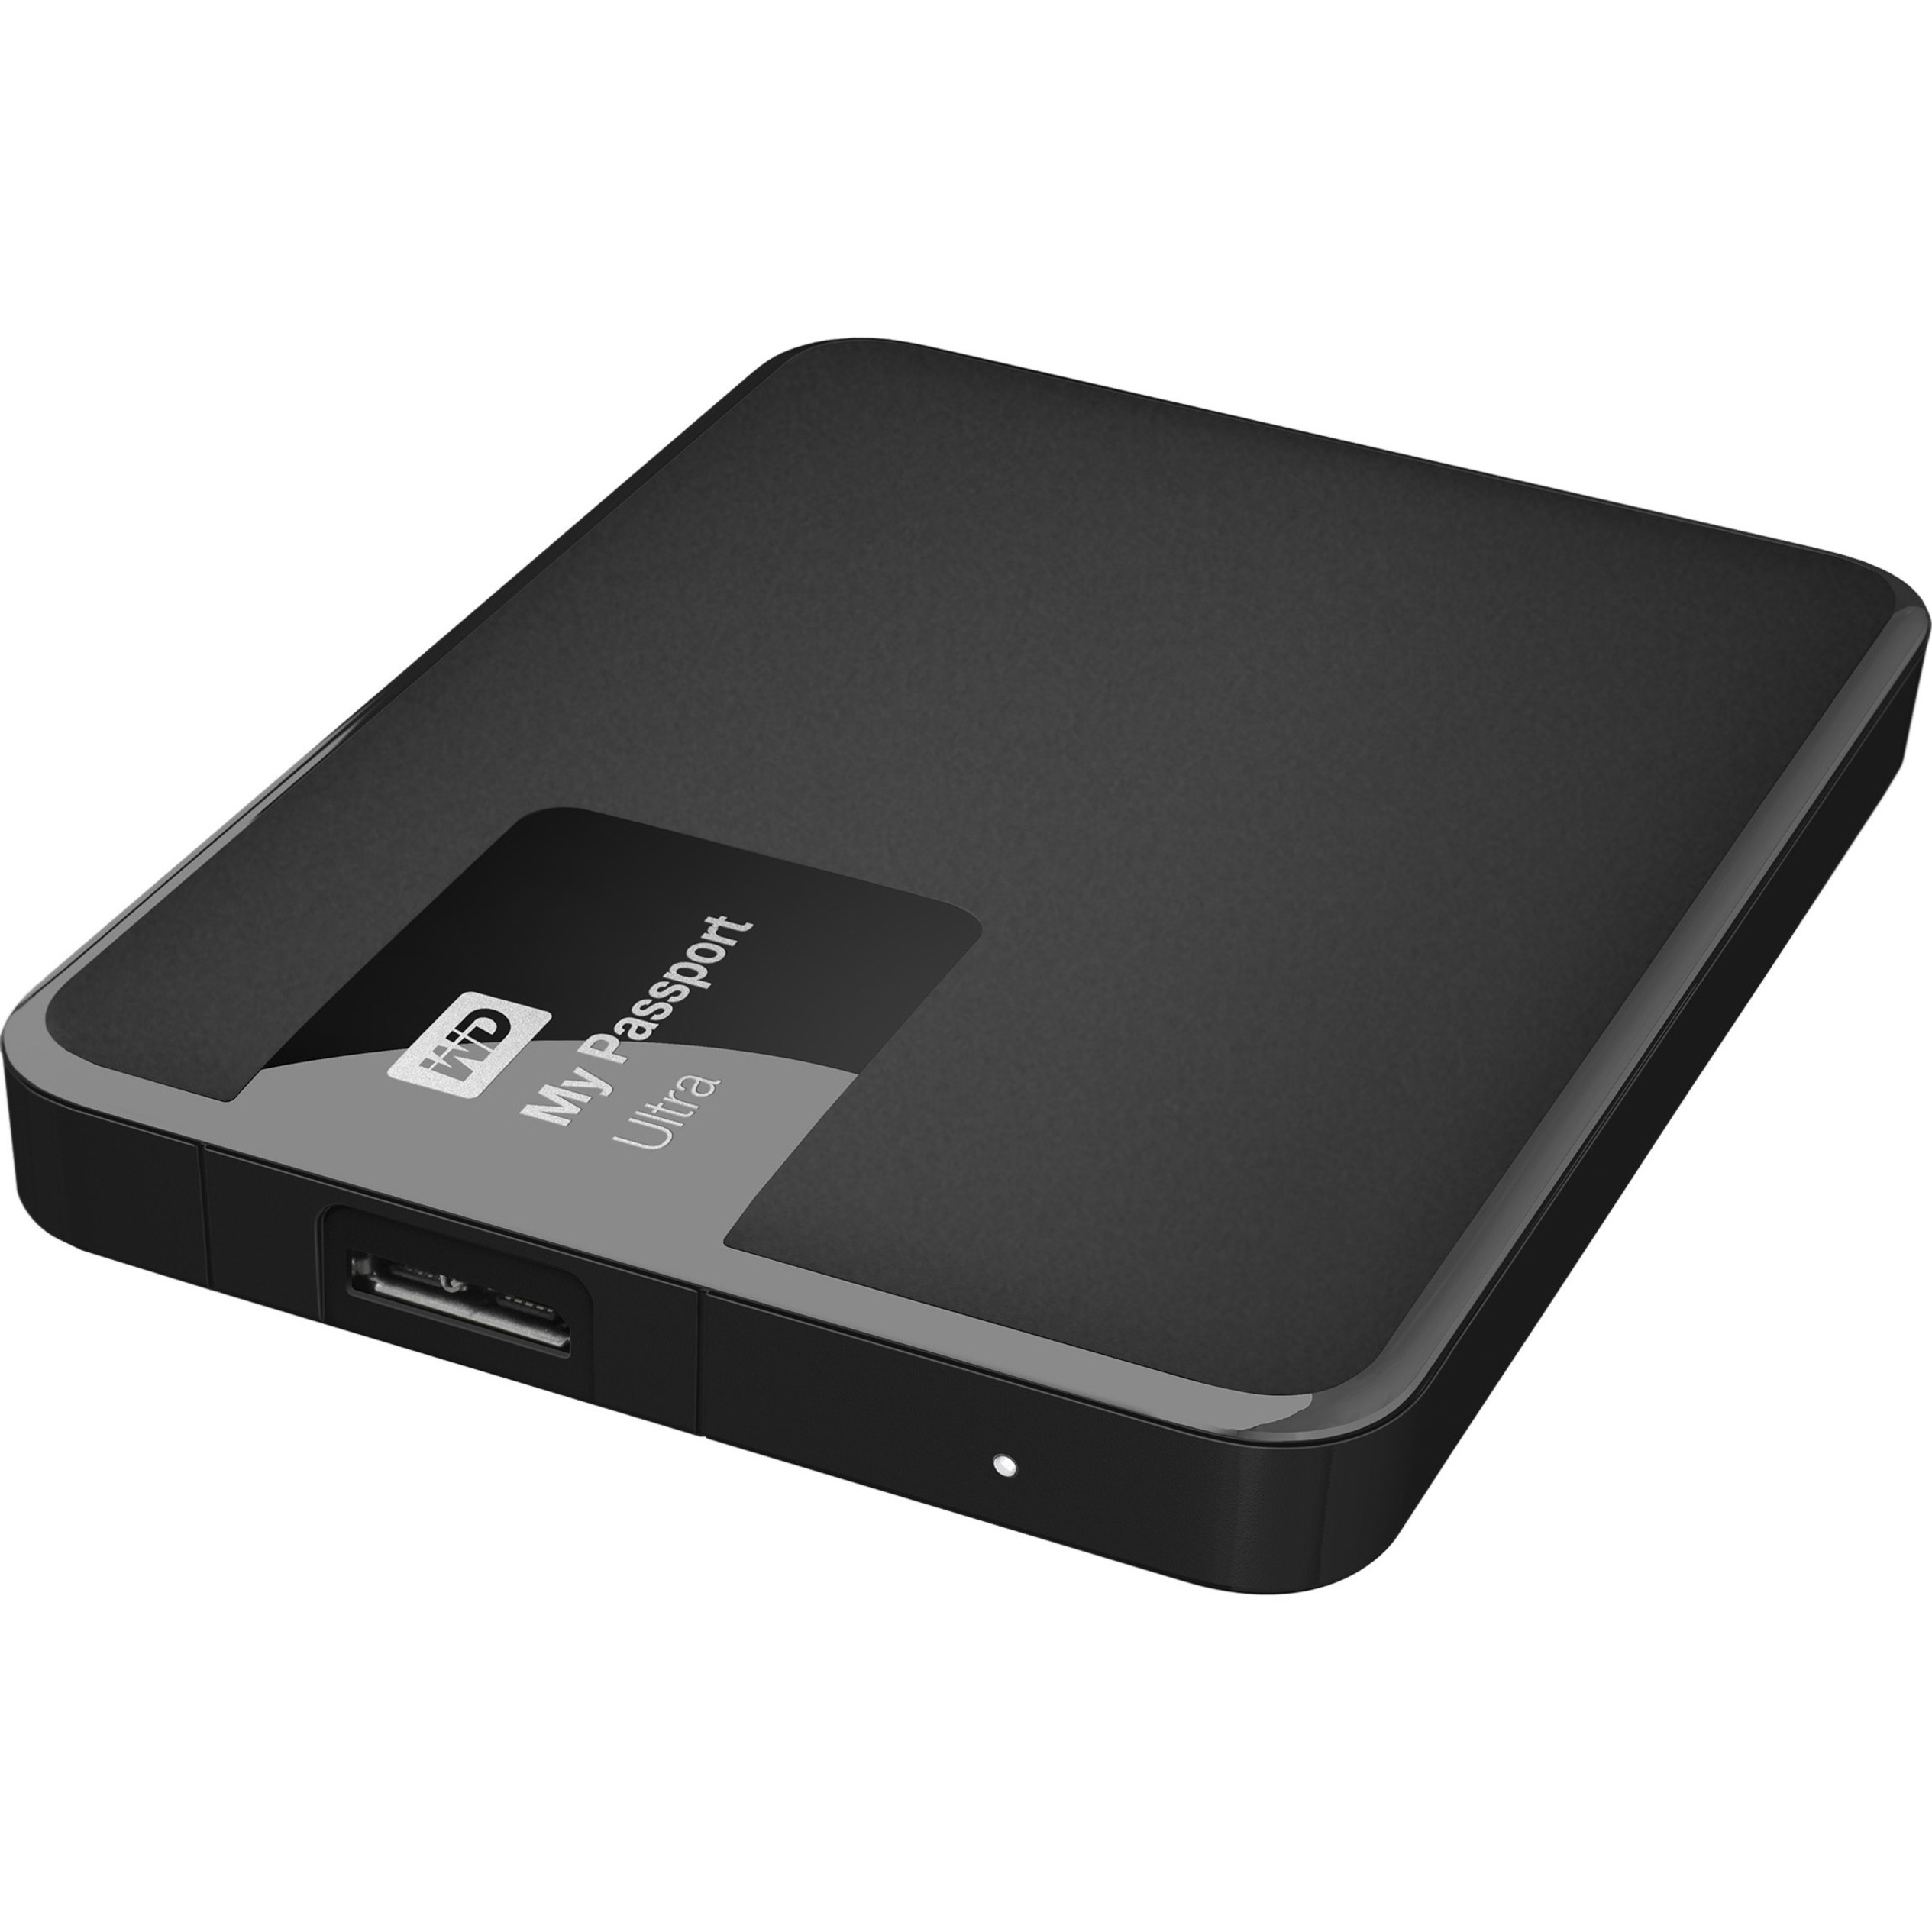 WD My Passport Ultra 500GB USB 3.0 Secure portable drive with auto backup Classic Black - image 1 of 6